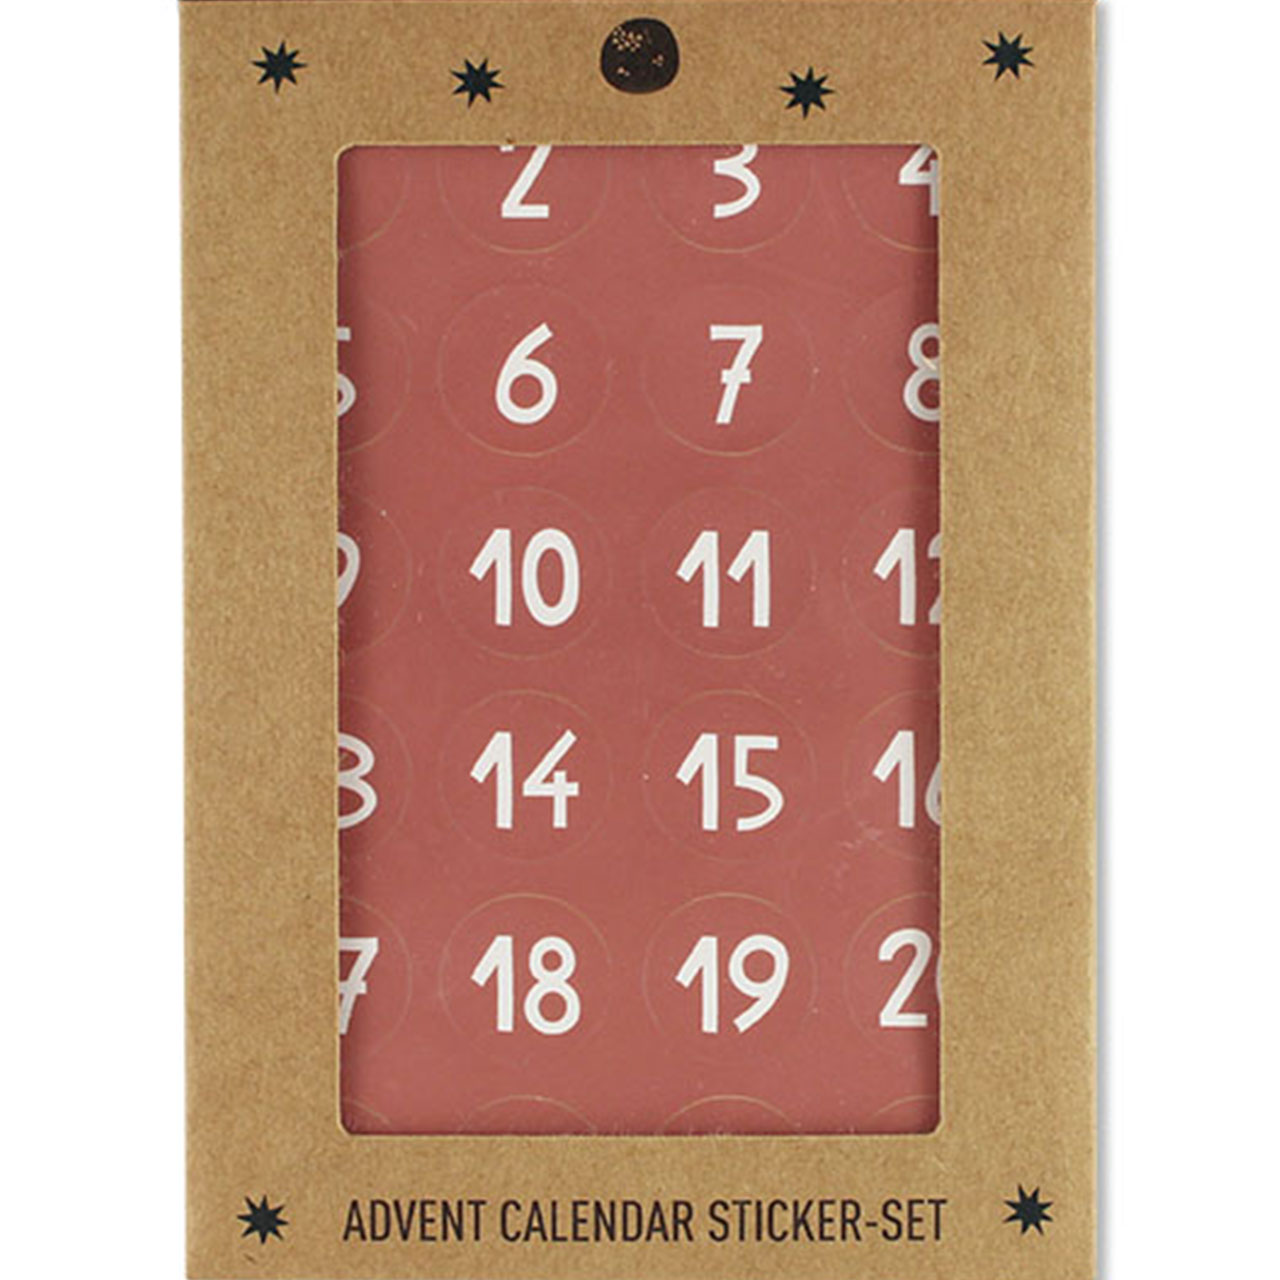 Advent Calendar Number Stickers - Dusty Pink 